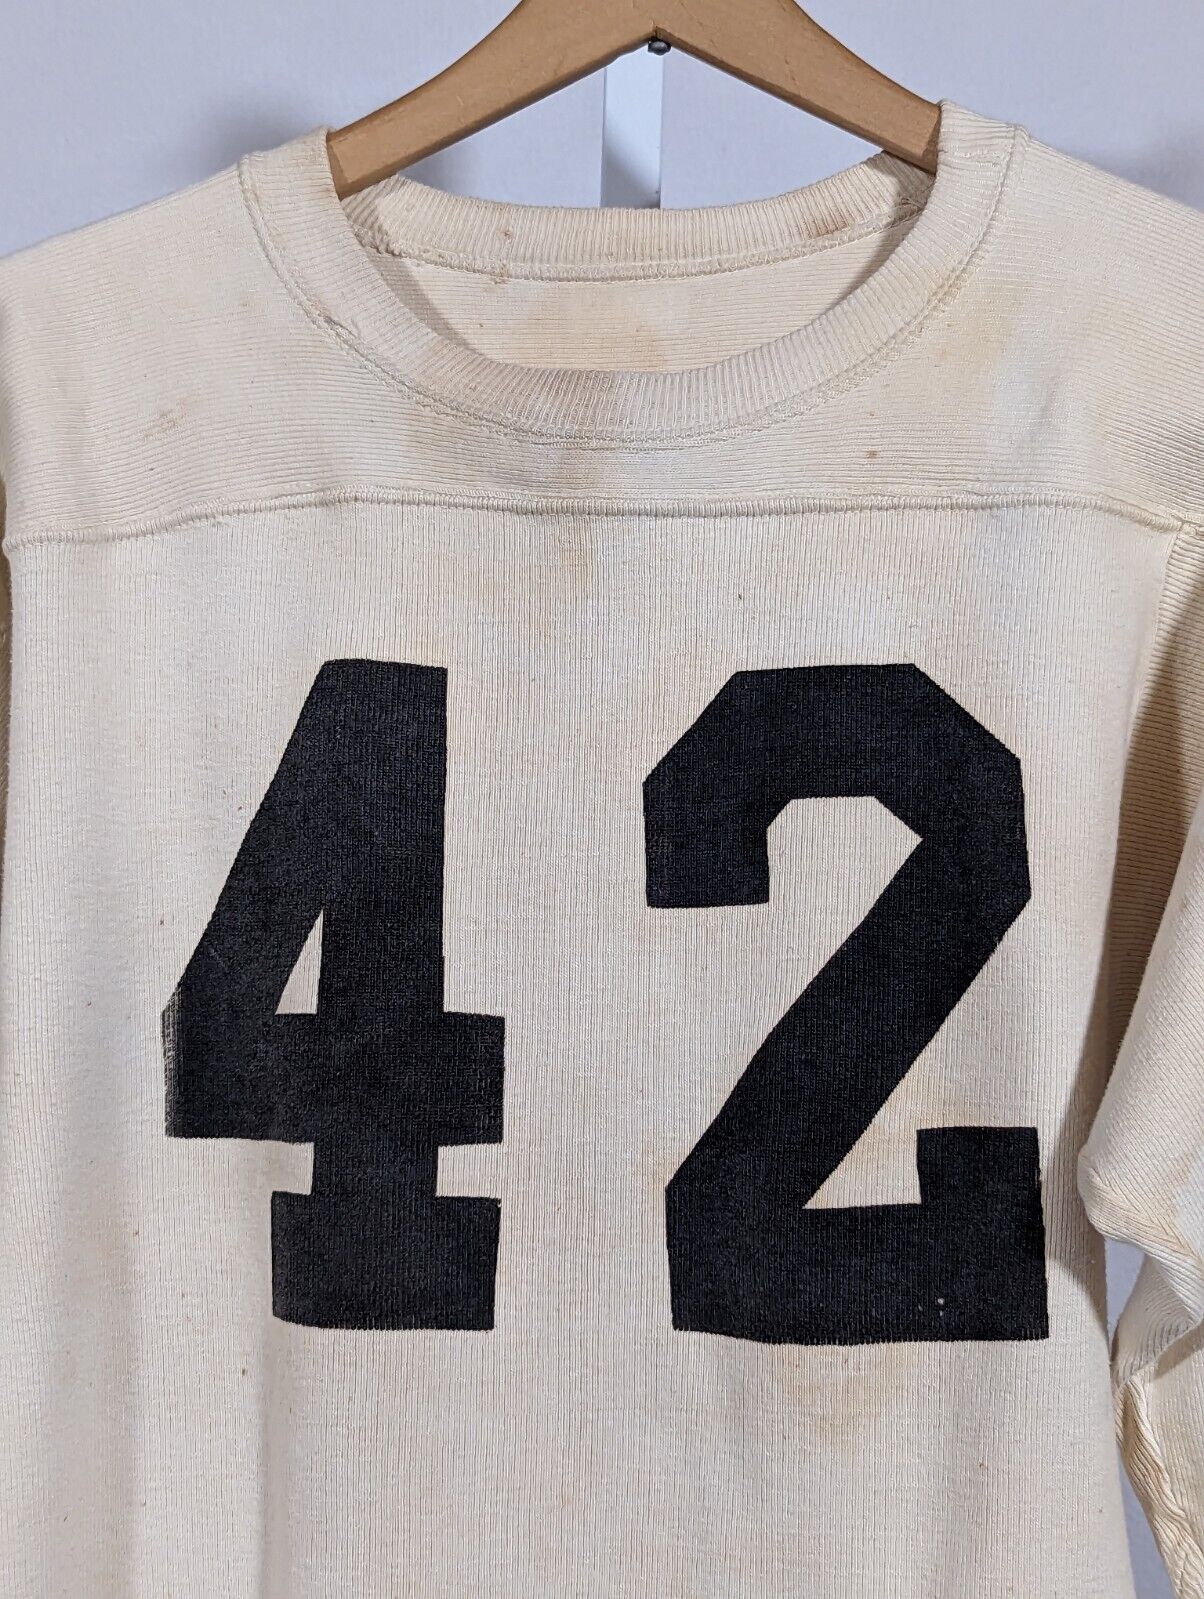 Vintage 30s 40s Athletic Football Cotton Jersey E… - image 4